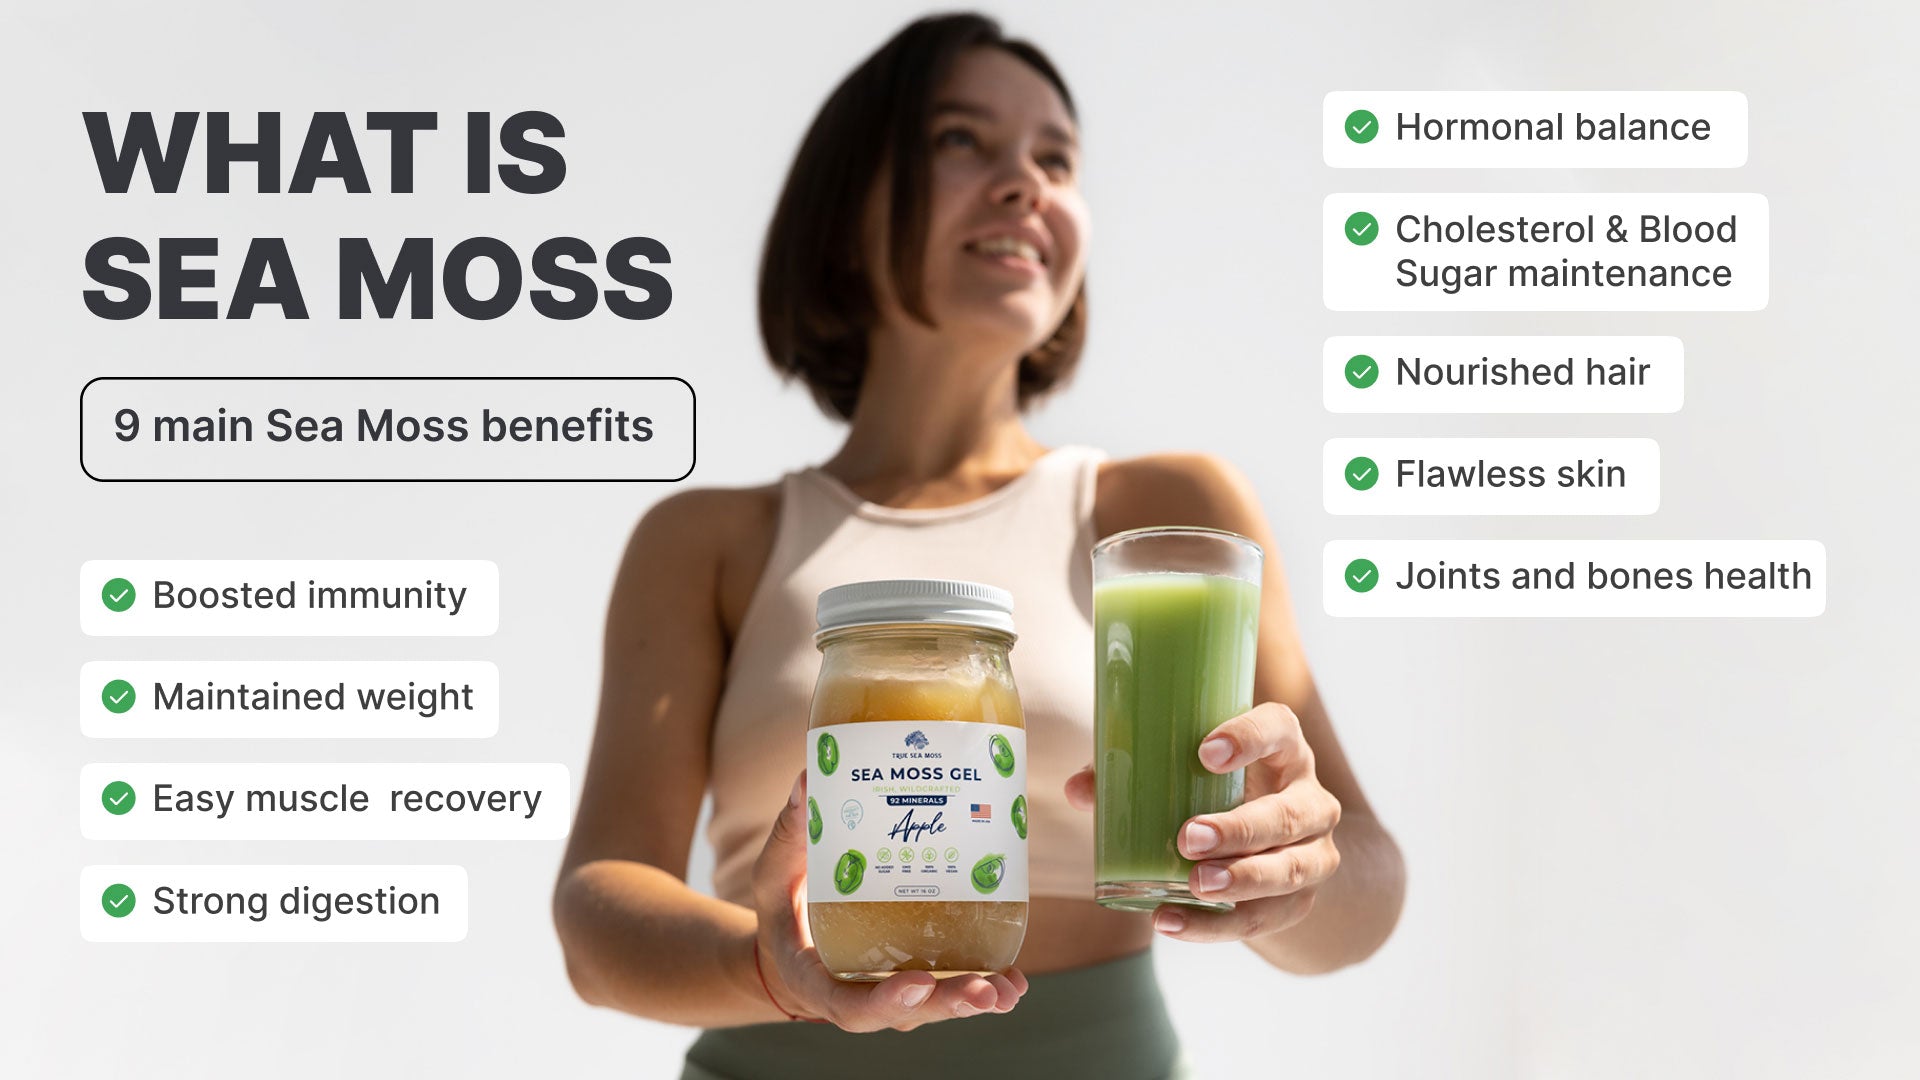 Sea moss: what it is and its benefits